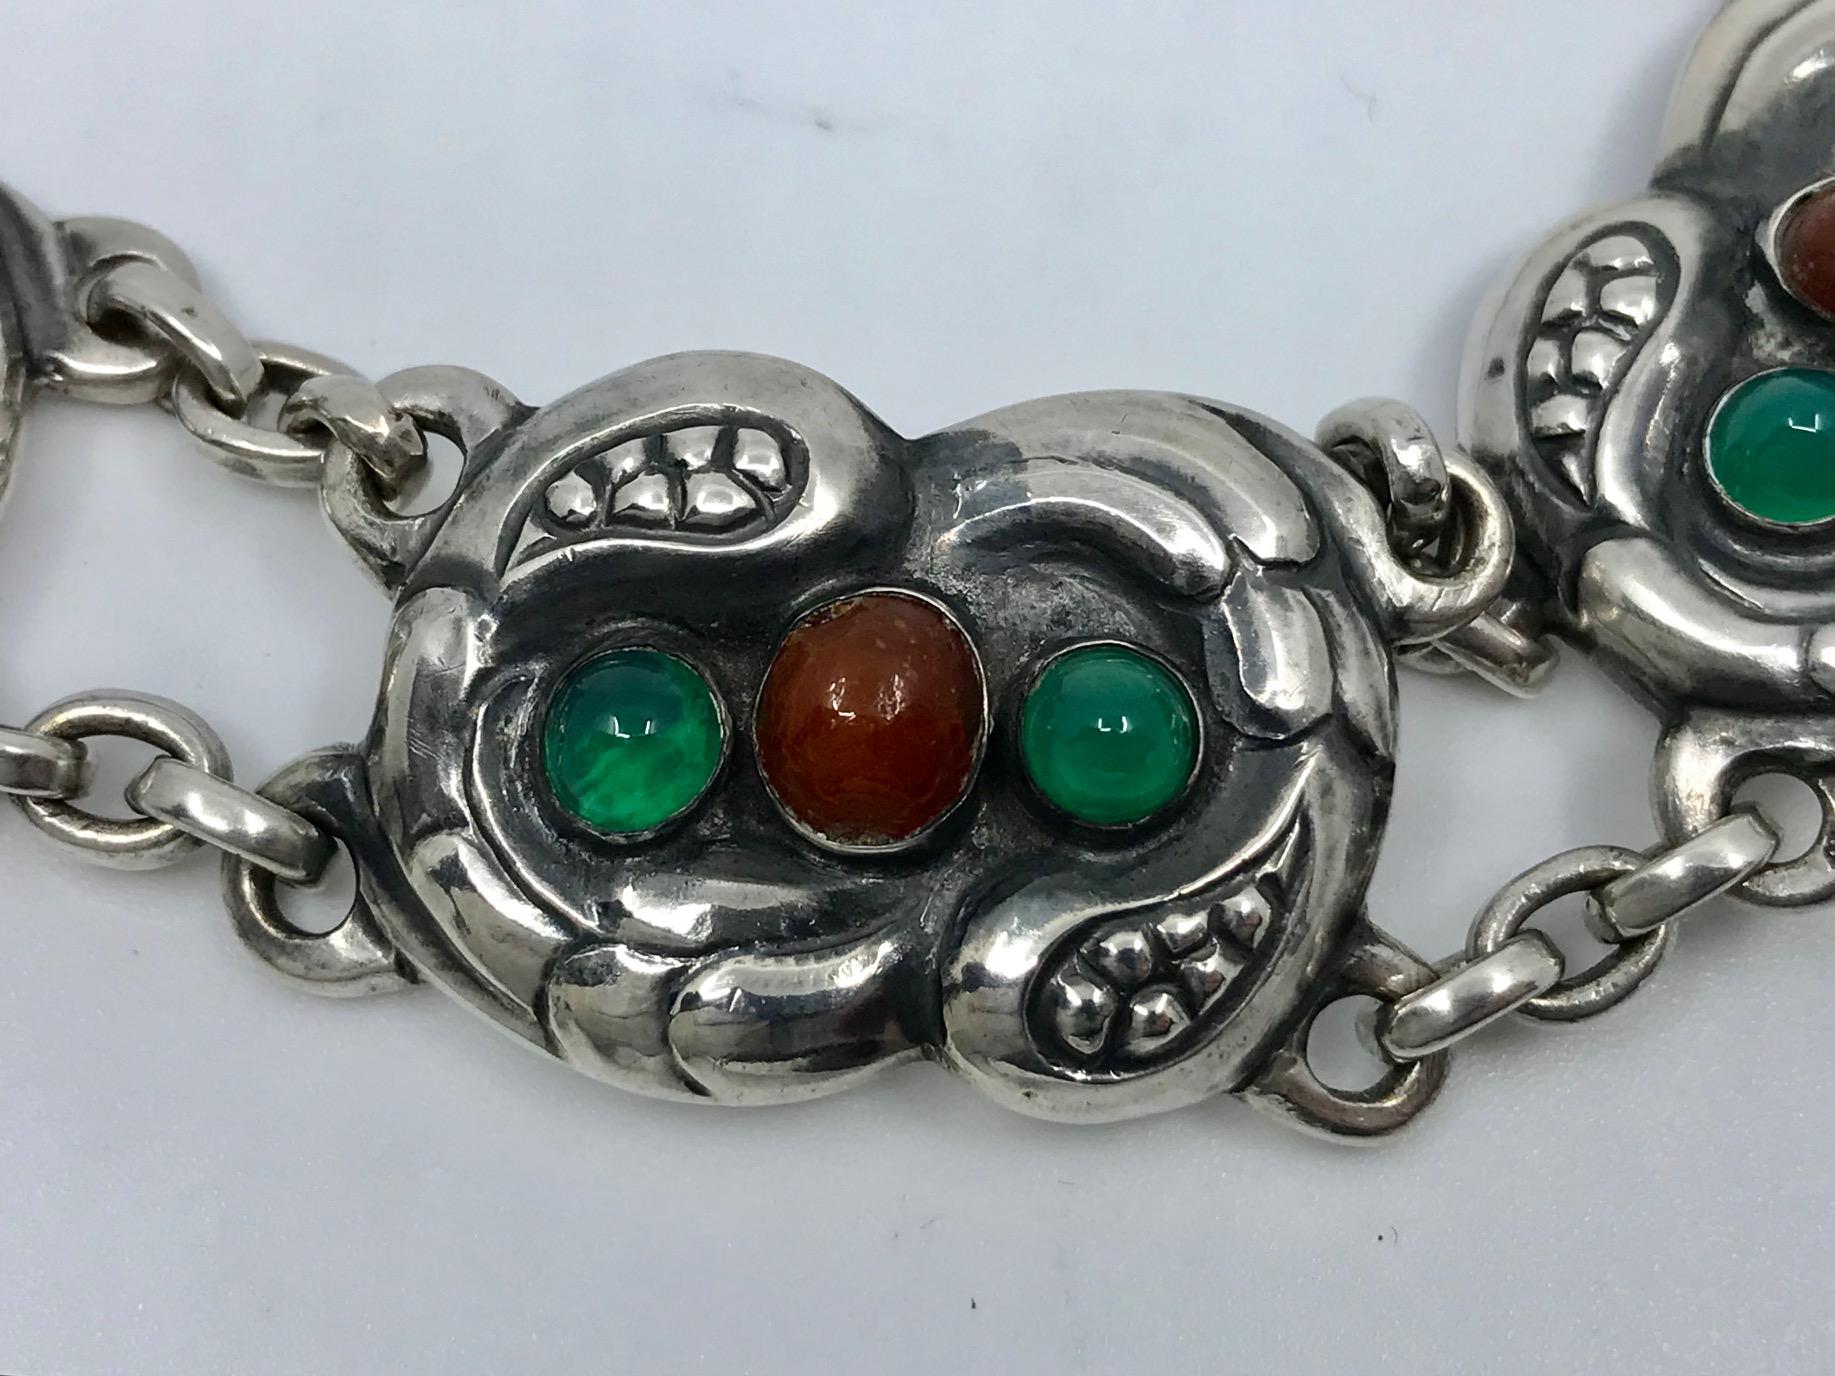 Antique silver Georg Jensen bracelet with cabochon set amber and green agate stones, design #1 by Georg Jensen from 1904.
Measures 7½” in length, the links are 7/8″ across (19cm, 2.1cm).
Antique Georg Jensen hallmarks from 1908-1914, 826s. Georg